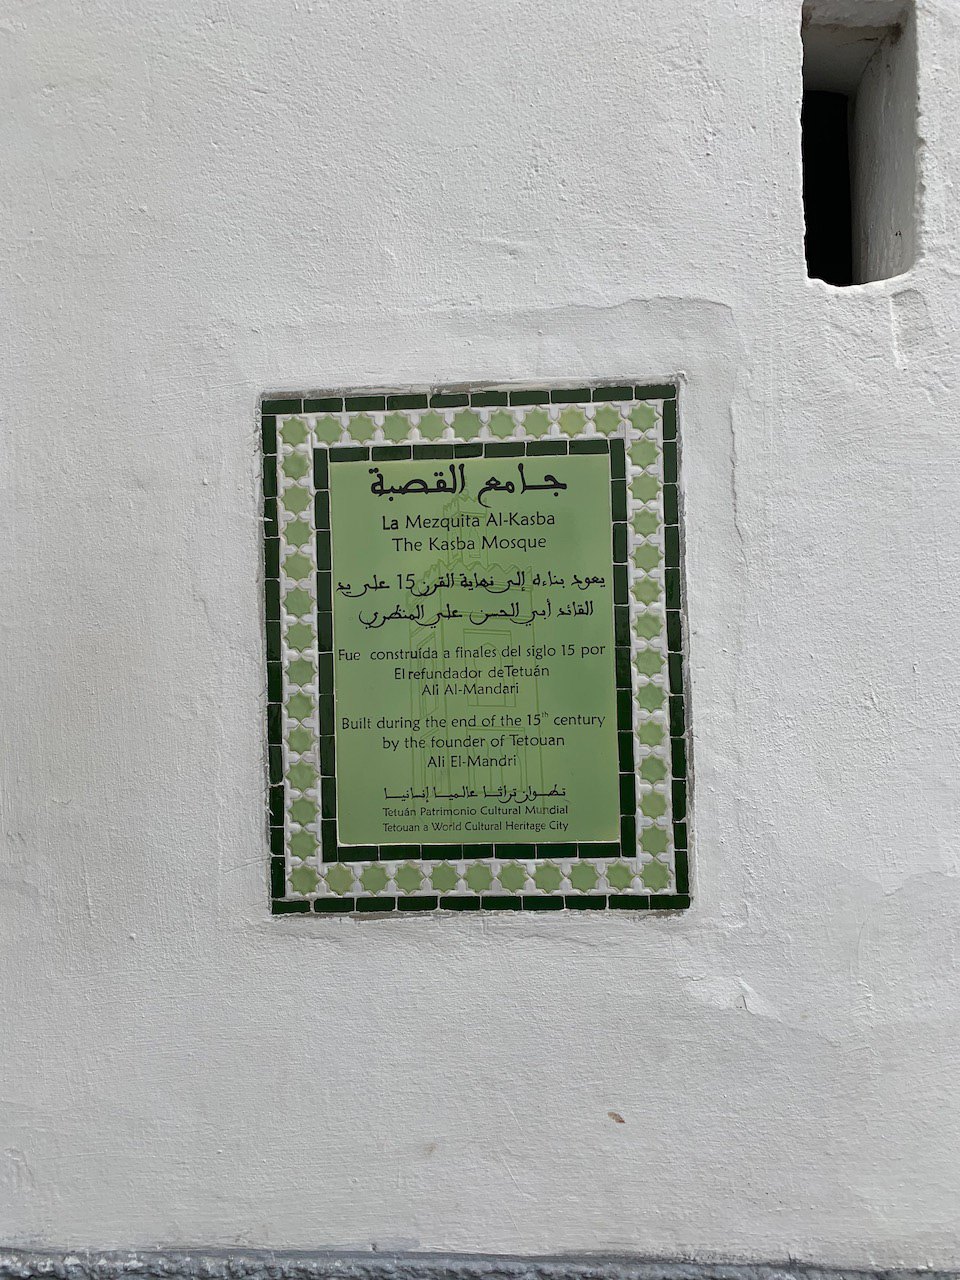 <p>View of an informational tile near the entrance</p>